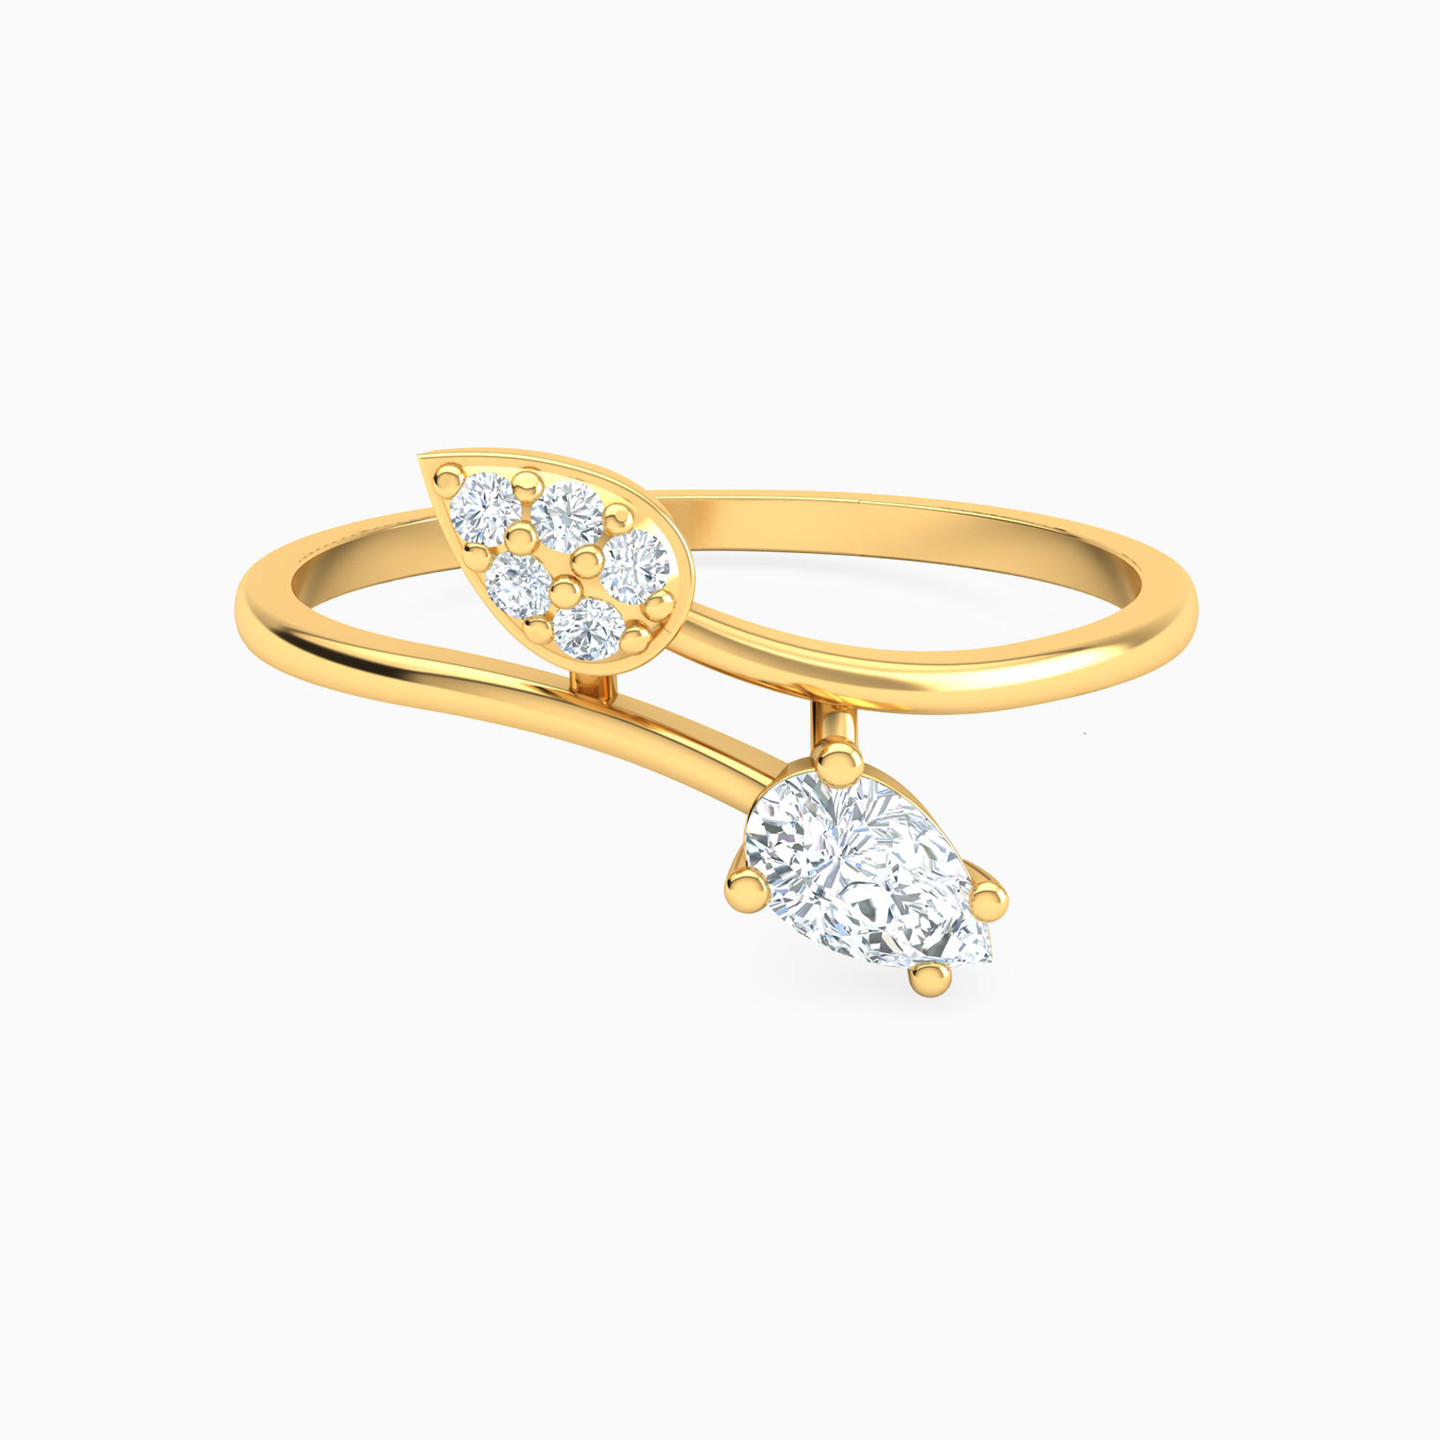 18K Gold Cubic Zirconia Two-headed Ring